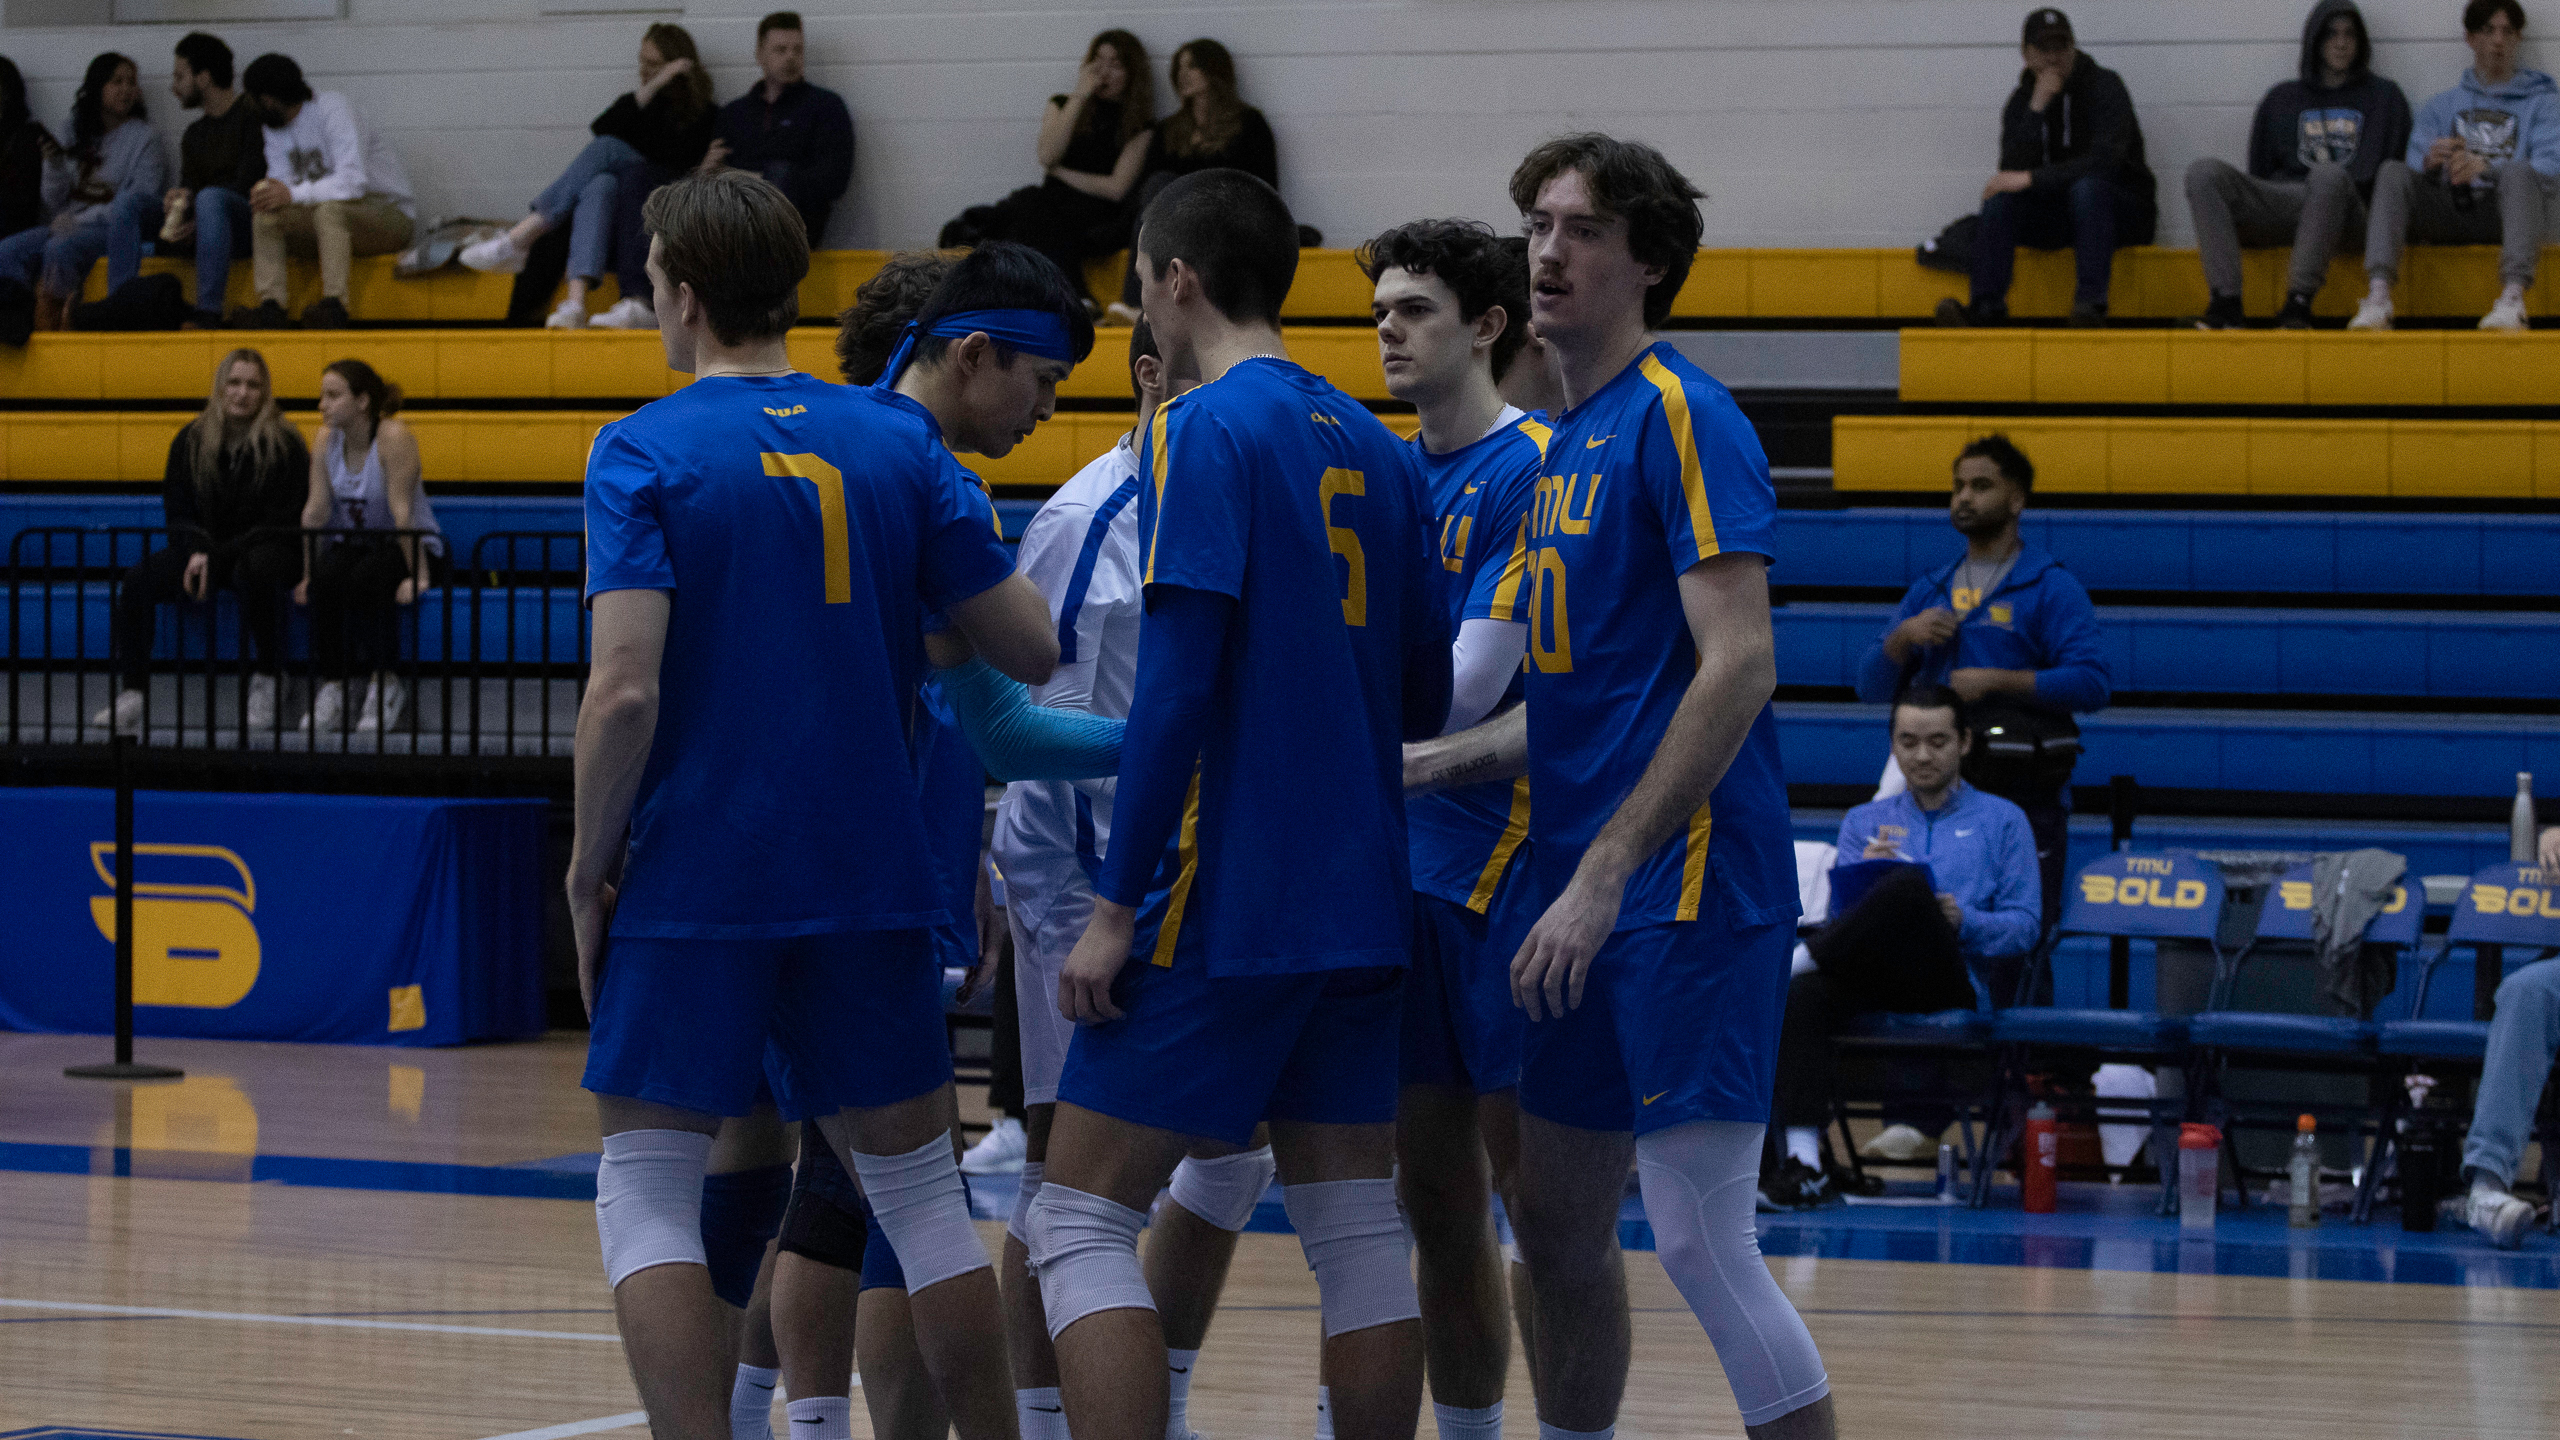 Members of the Bold men's volleyball team huddle together